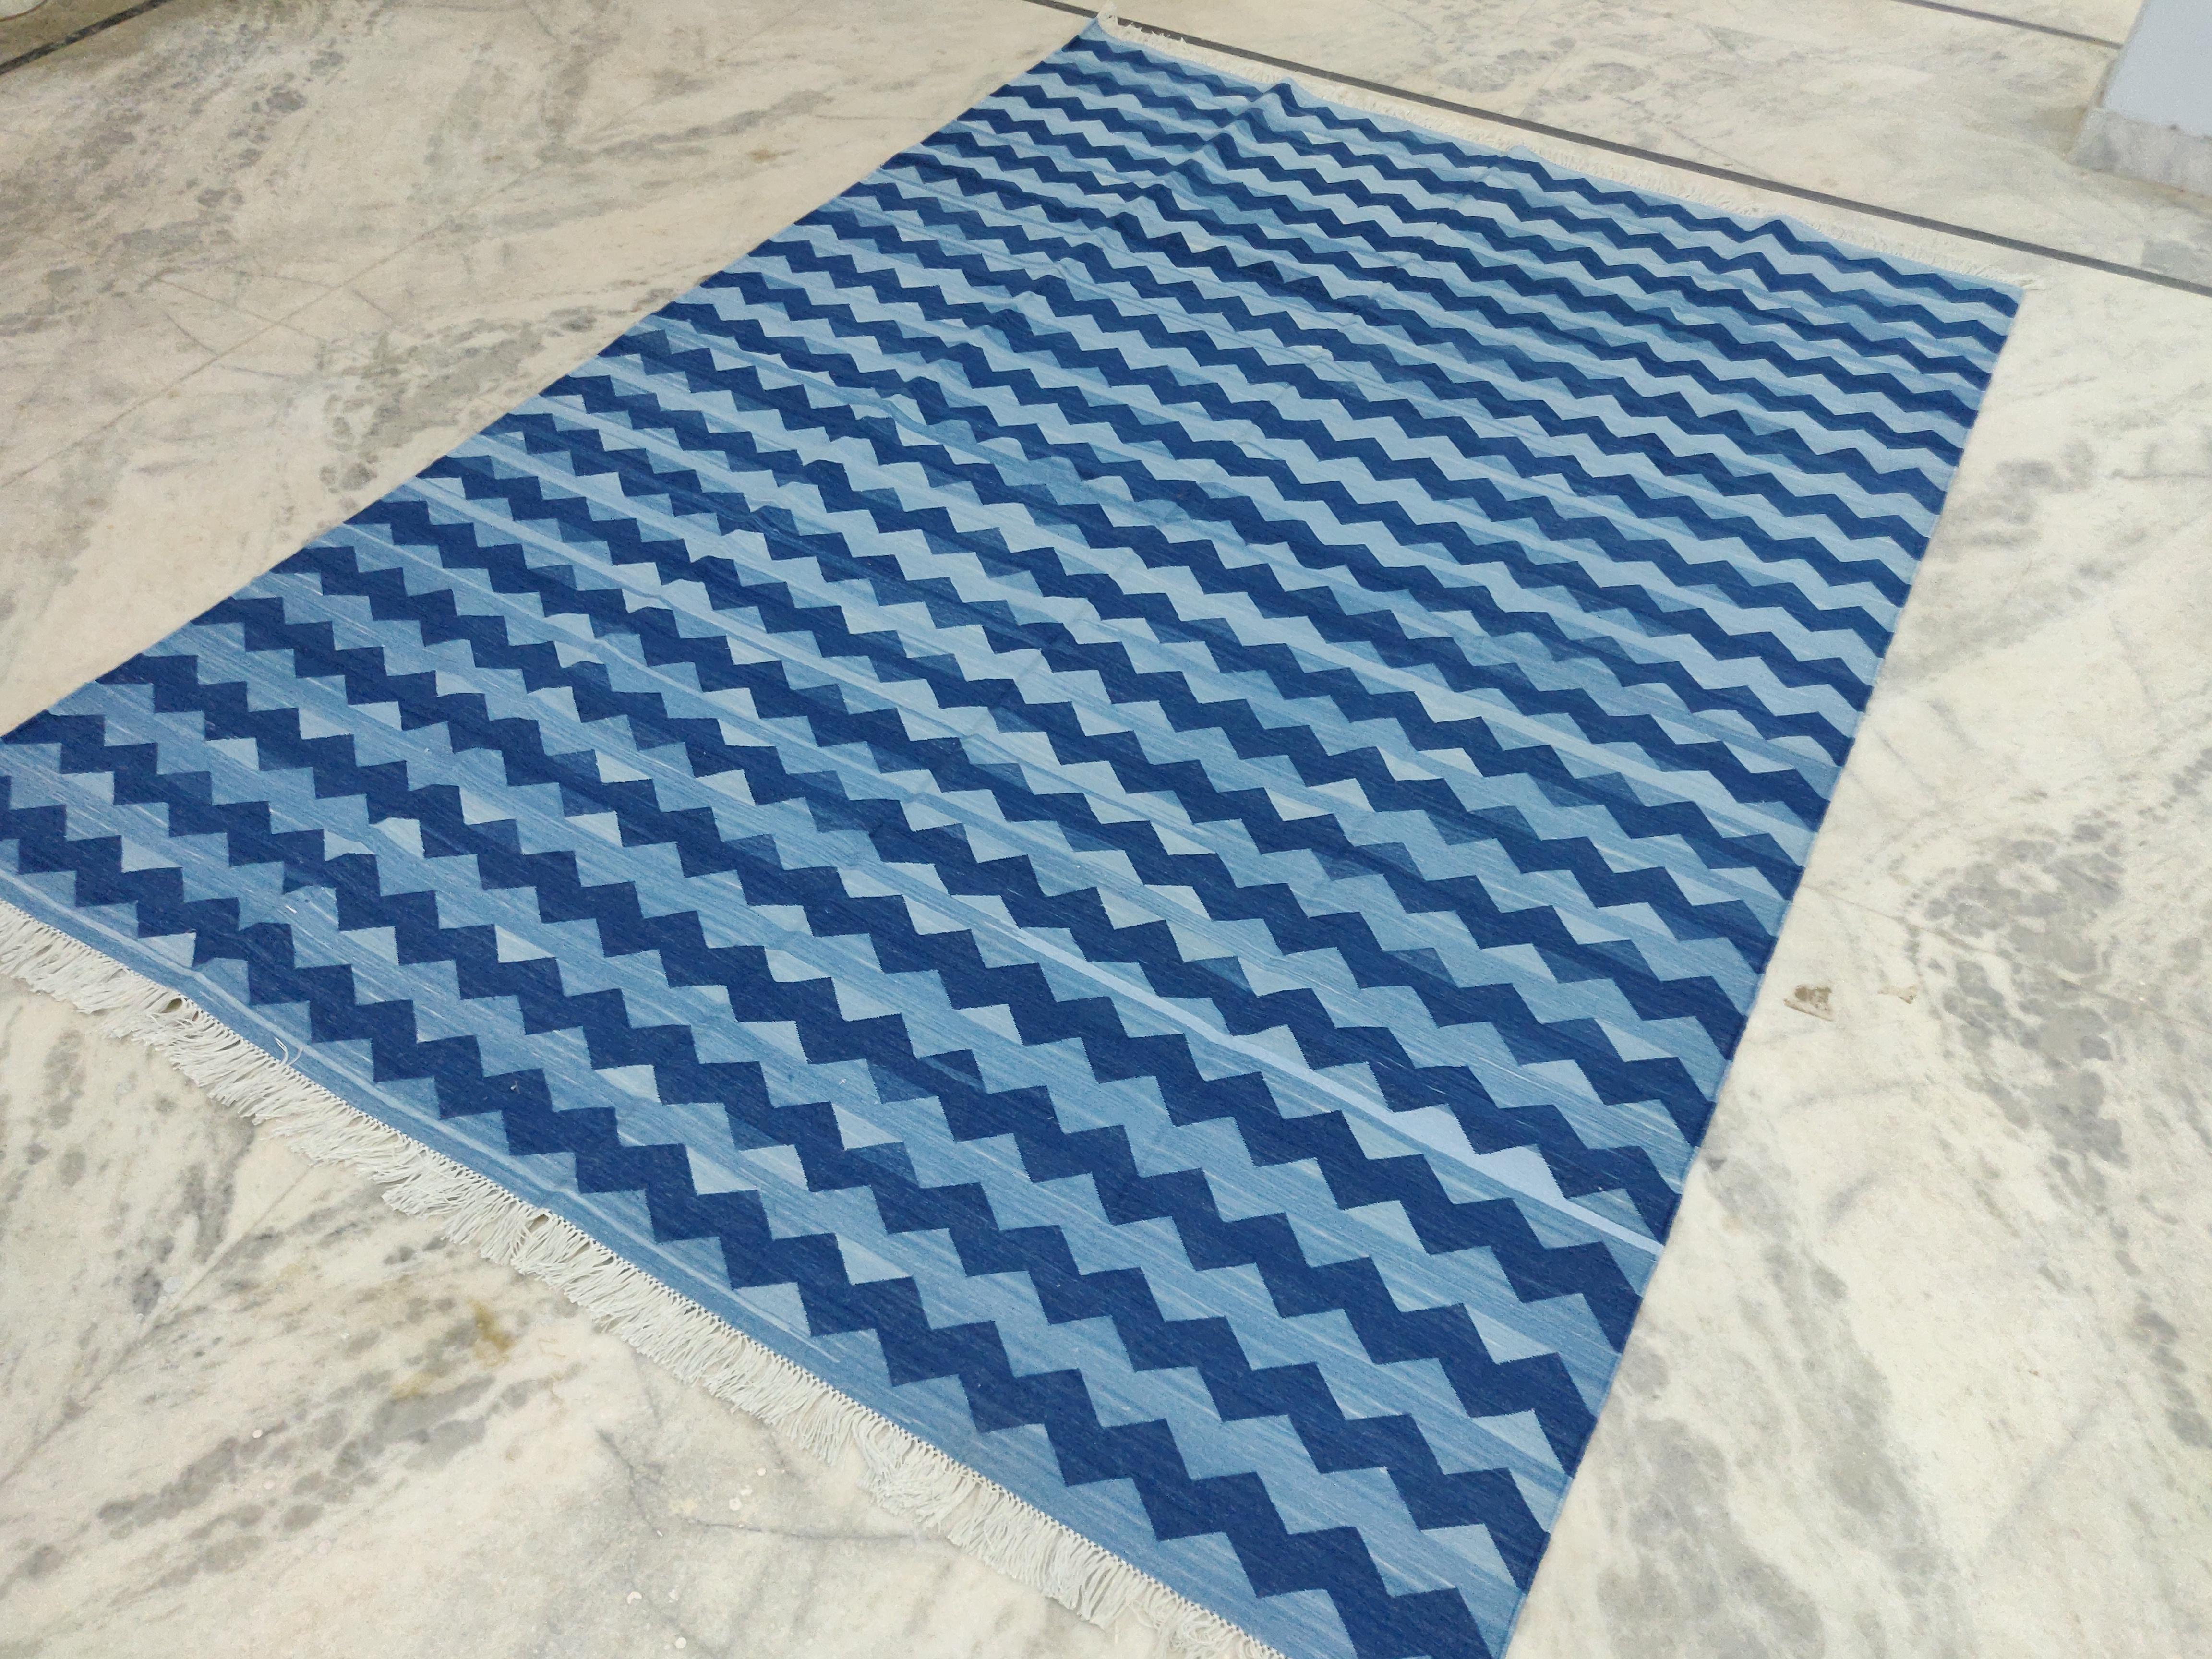 Cotton Vegetable Dyed Indigo Blue and Sky Blue Zig Zag Striped Indian Dhurrie Rug-6'x9'(180x270cm) 

These special flat-weave dhurries are hand-woven with 15 ply 100% cotton yarn. Due to the special manufacturing techniques used to create our rugs,